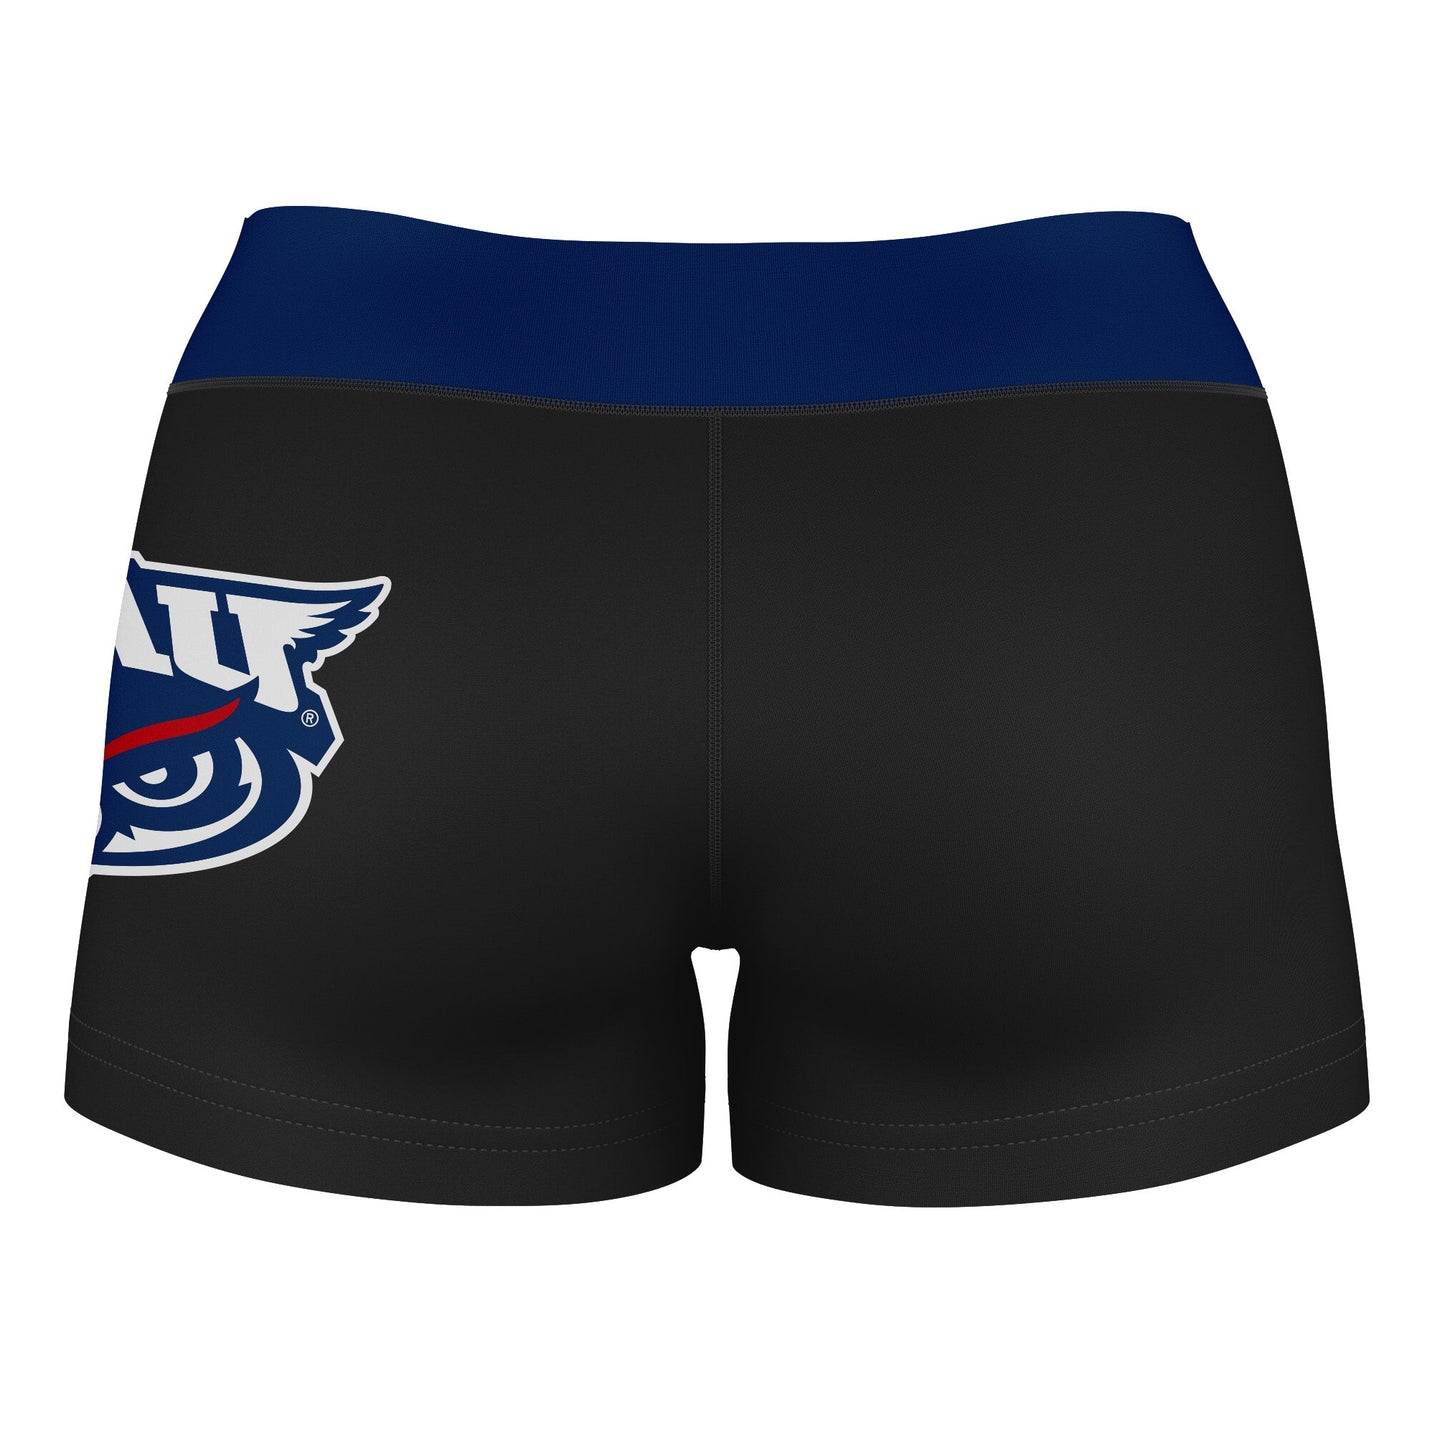 FAU Owls Vive La Fete Game Day Logo on Thigh and Waistband Black and Blue Women Yoga Booty Workout Shorts 3.75 Inseam" - Vive La F̻te - Online Apparel Store